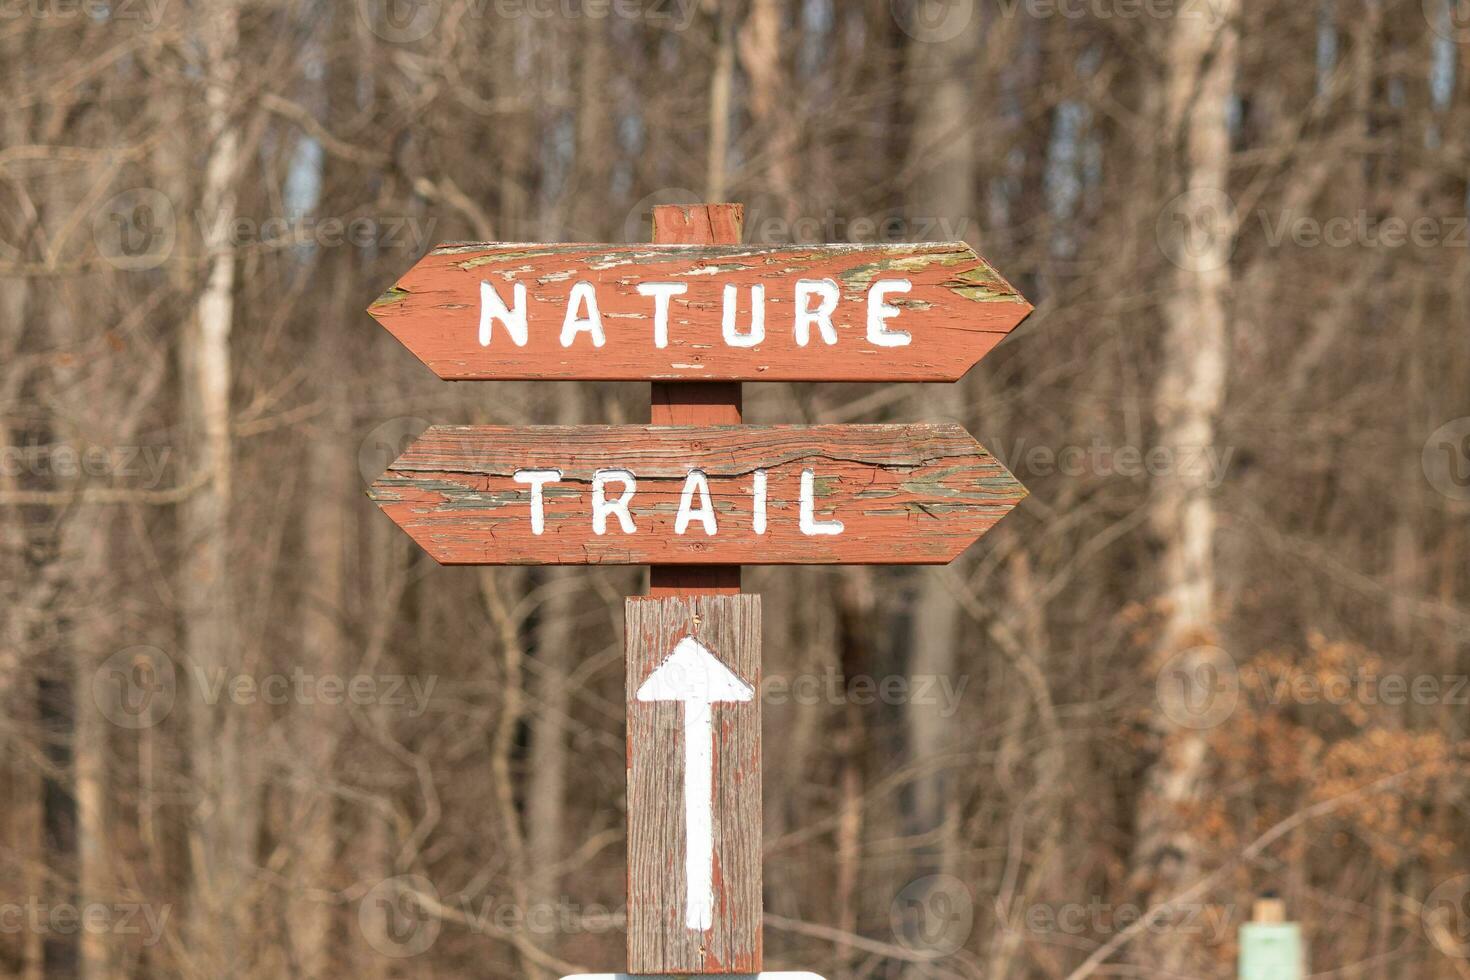 This sign in the woods marks the area of the trail. Helping to keep hikers from getting them lost and leading the way. The brown paint looks worn and chipping. The white letters standing out. photo